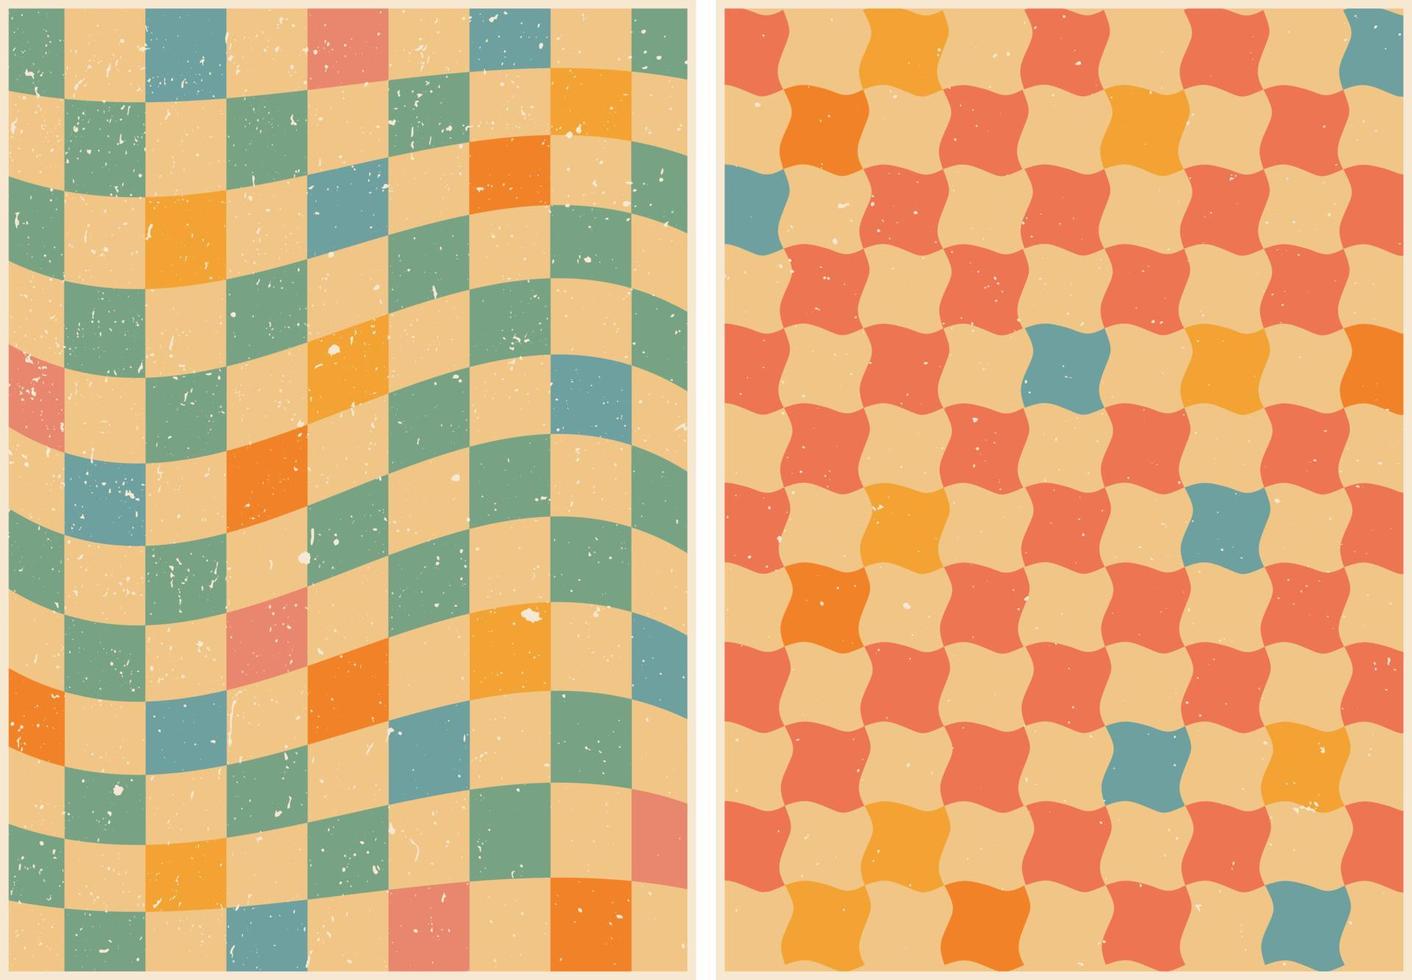 Set of posters in retro style. Abstract checkered background. Chess cage. Psychedelic wallpaper. Colorful vector art design. 60s, 70s, hippies. Postcard set, poster design.